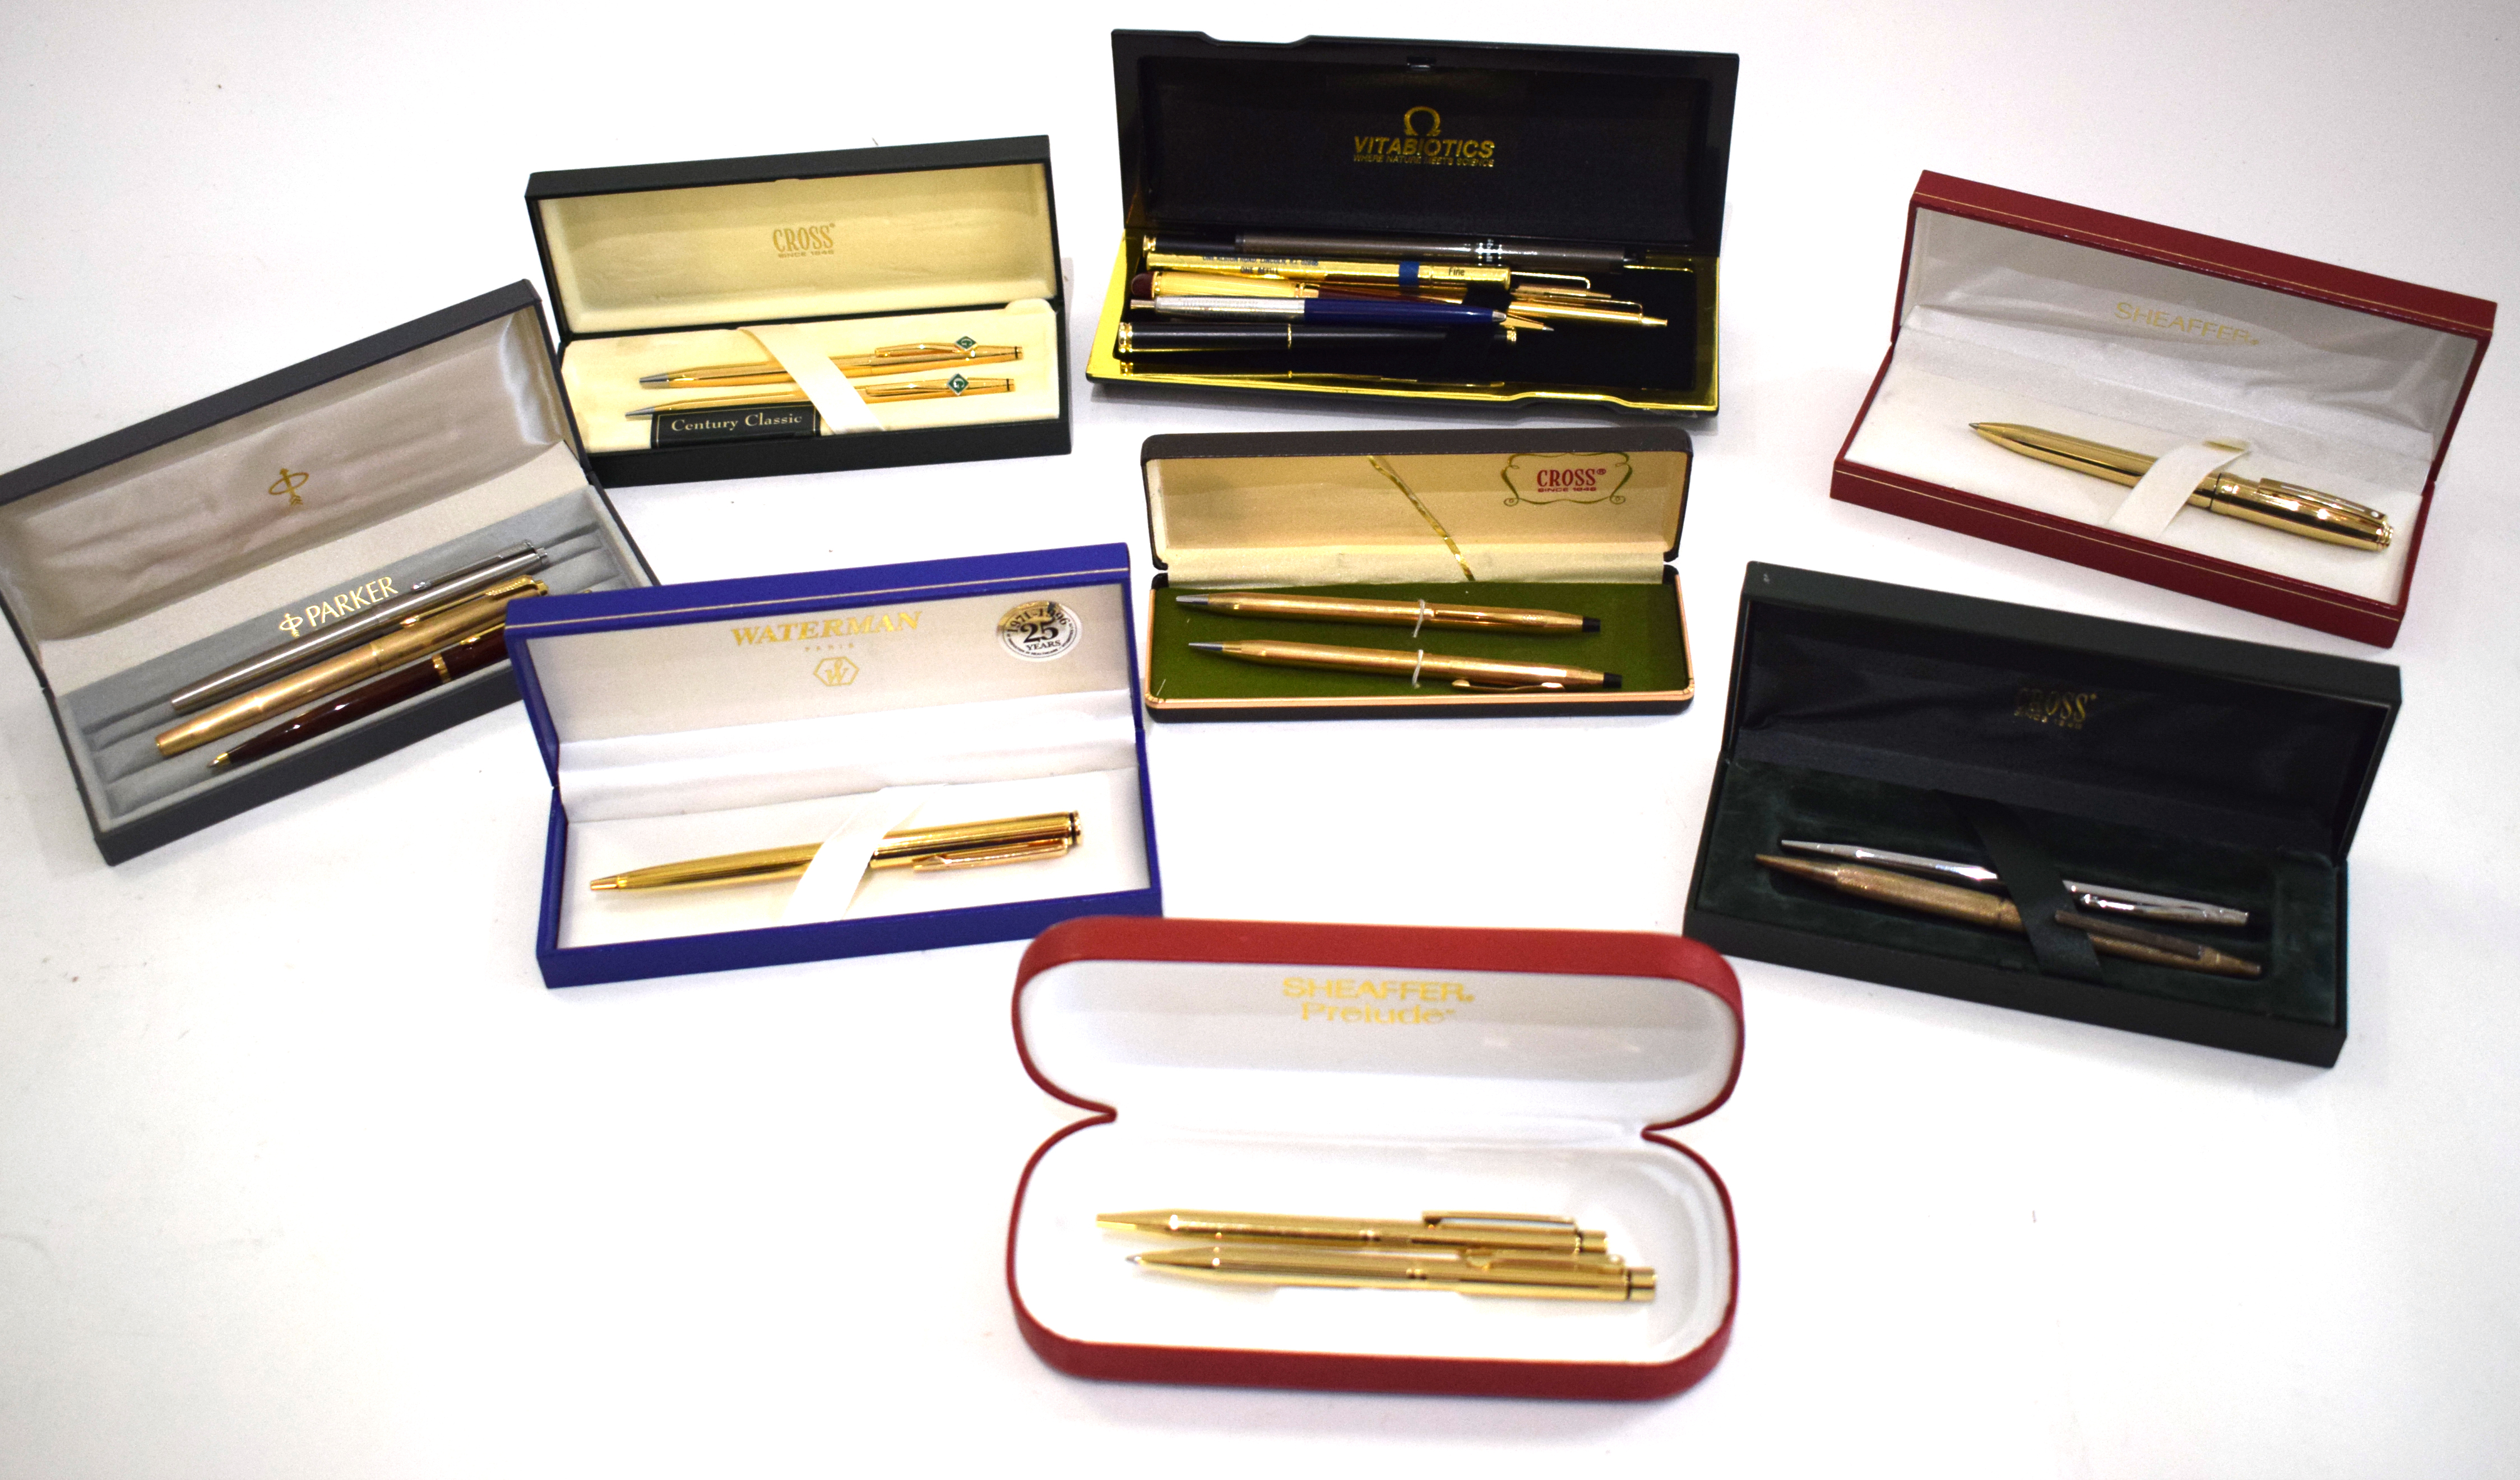 Mixed Lot: cased Sheaffer gold plated pencil and ballpoint pen set, a cased Sheaffer gold plated